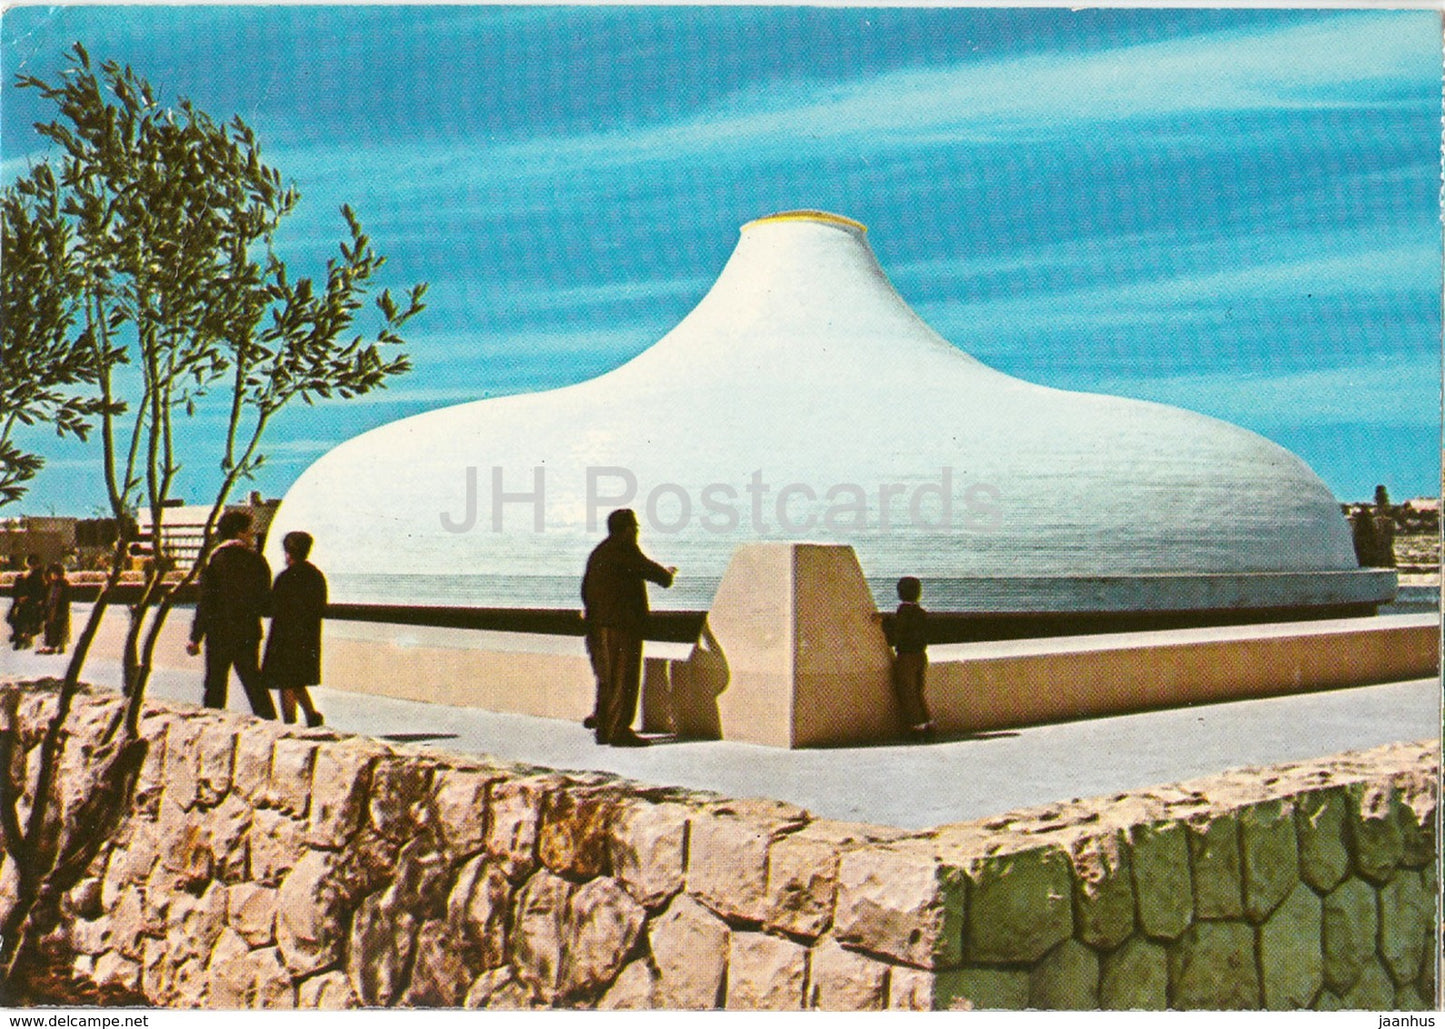 Jerusalem - The Israel Museum - The Shrine of the Book - 7044 - 1966 - Israel - used - JH Postcards